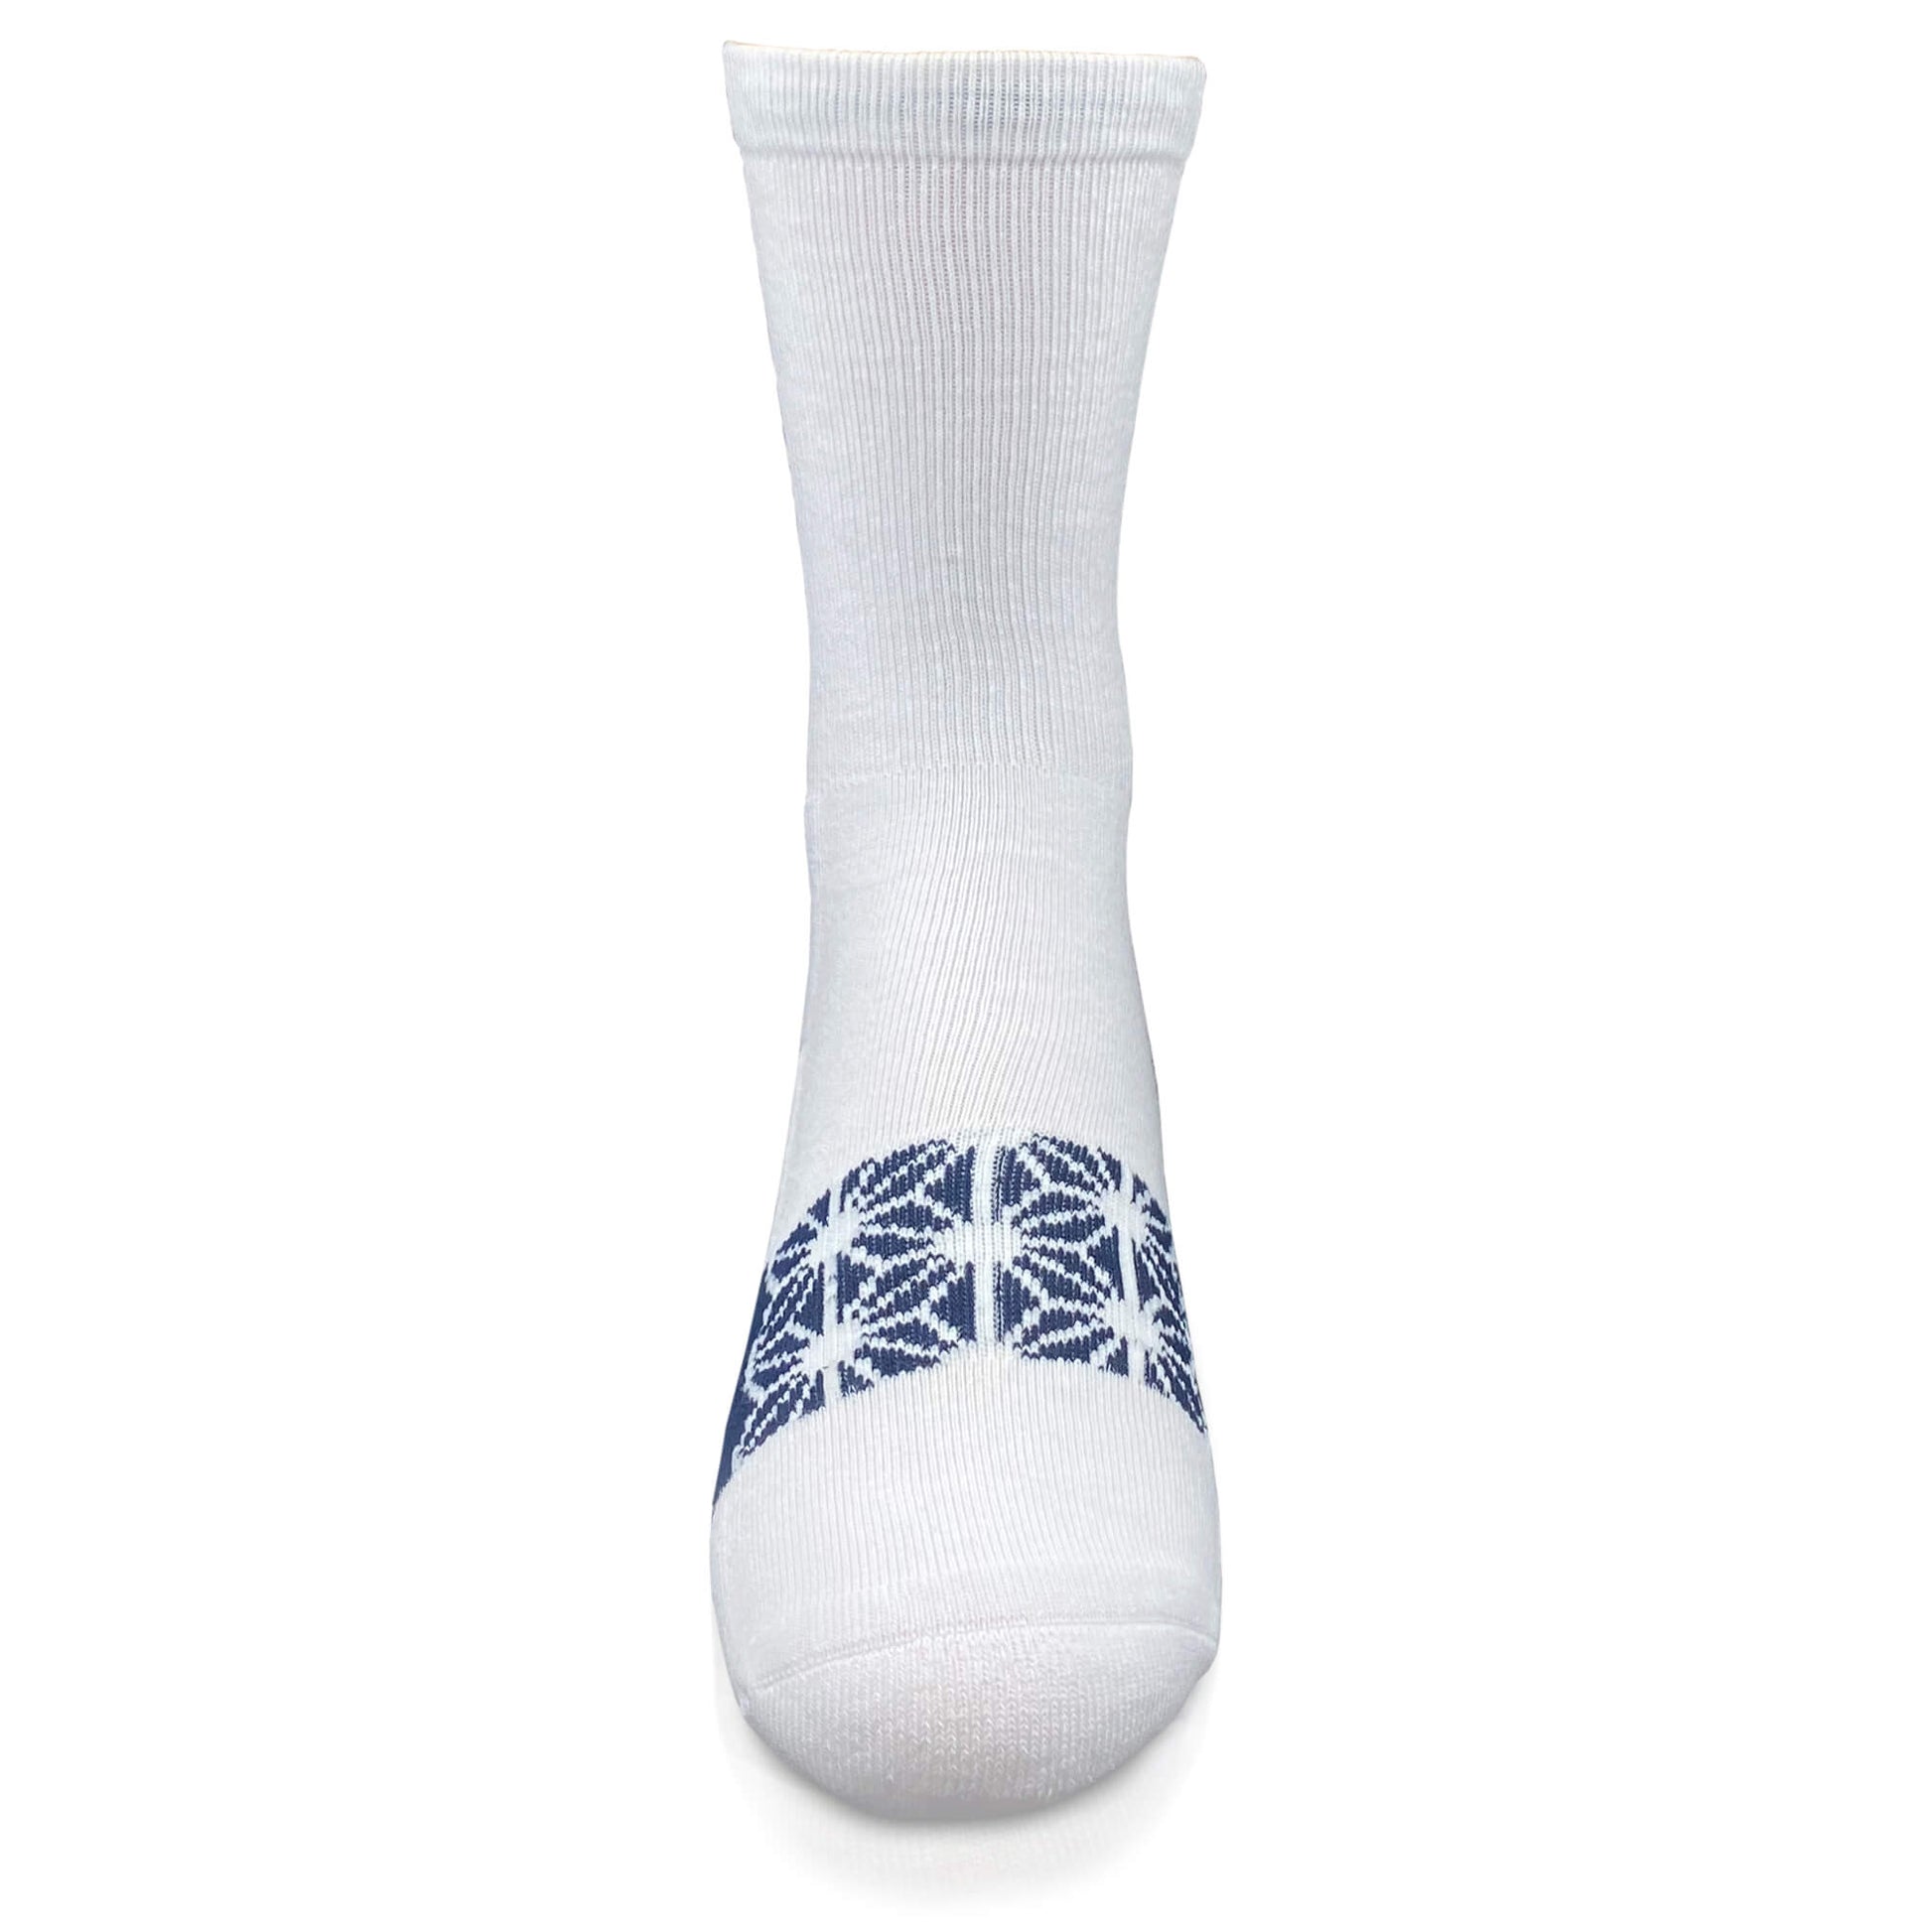 Modern Envy comfy crew socks White and Navy Blue front view